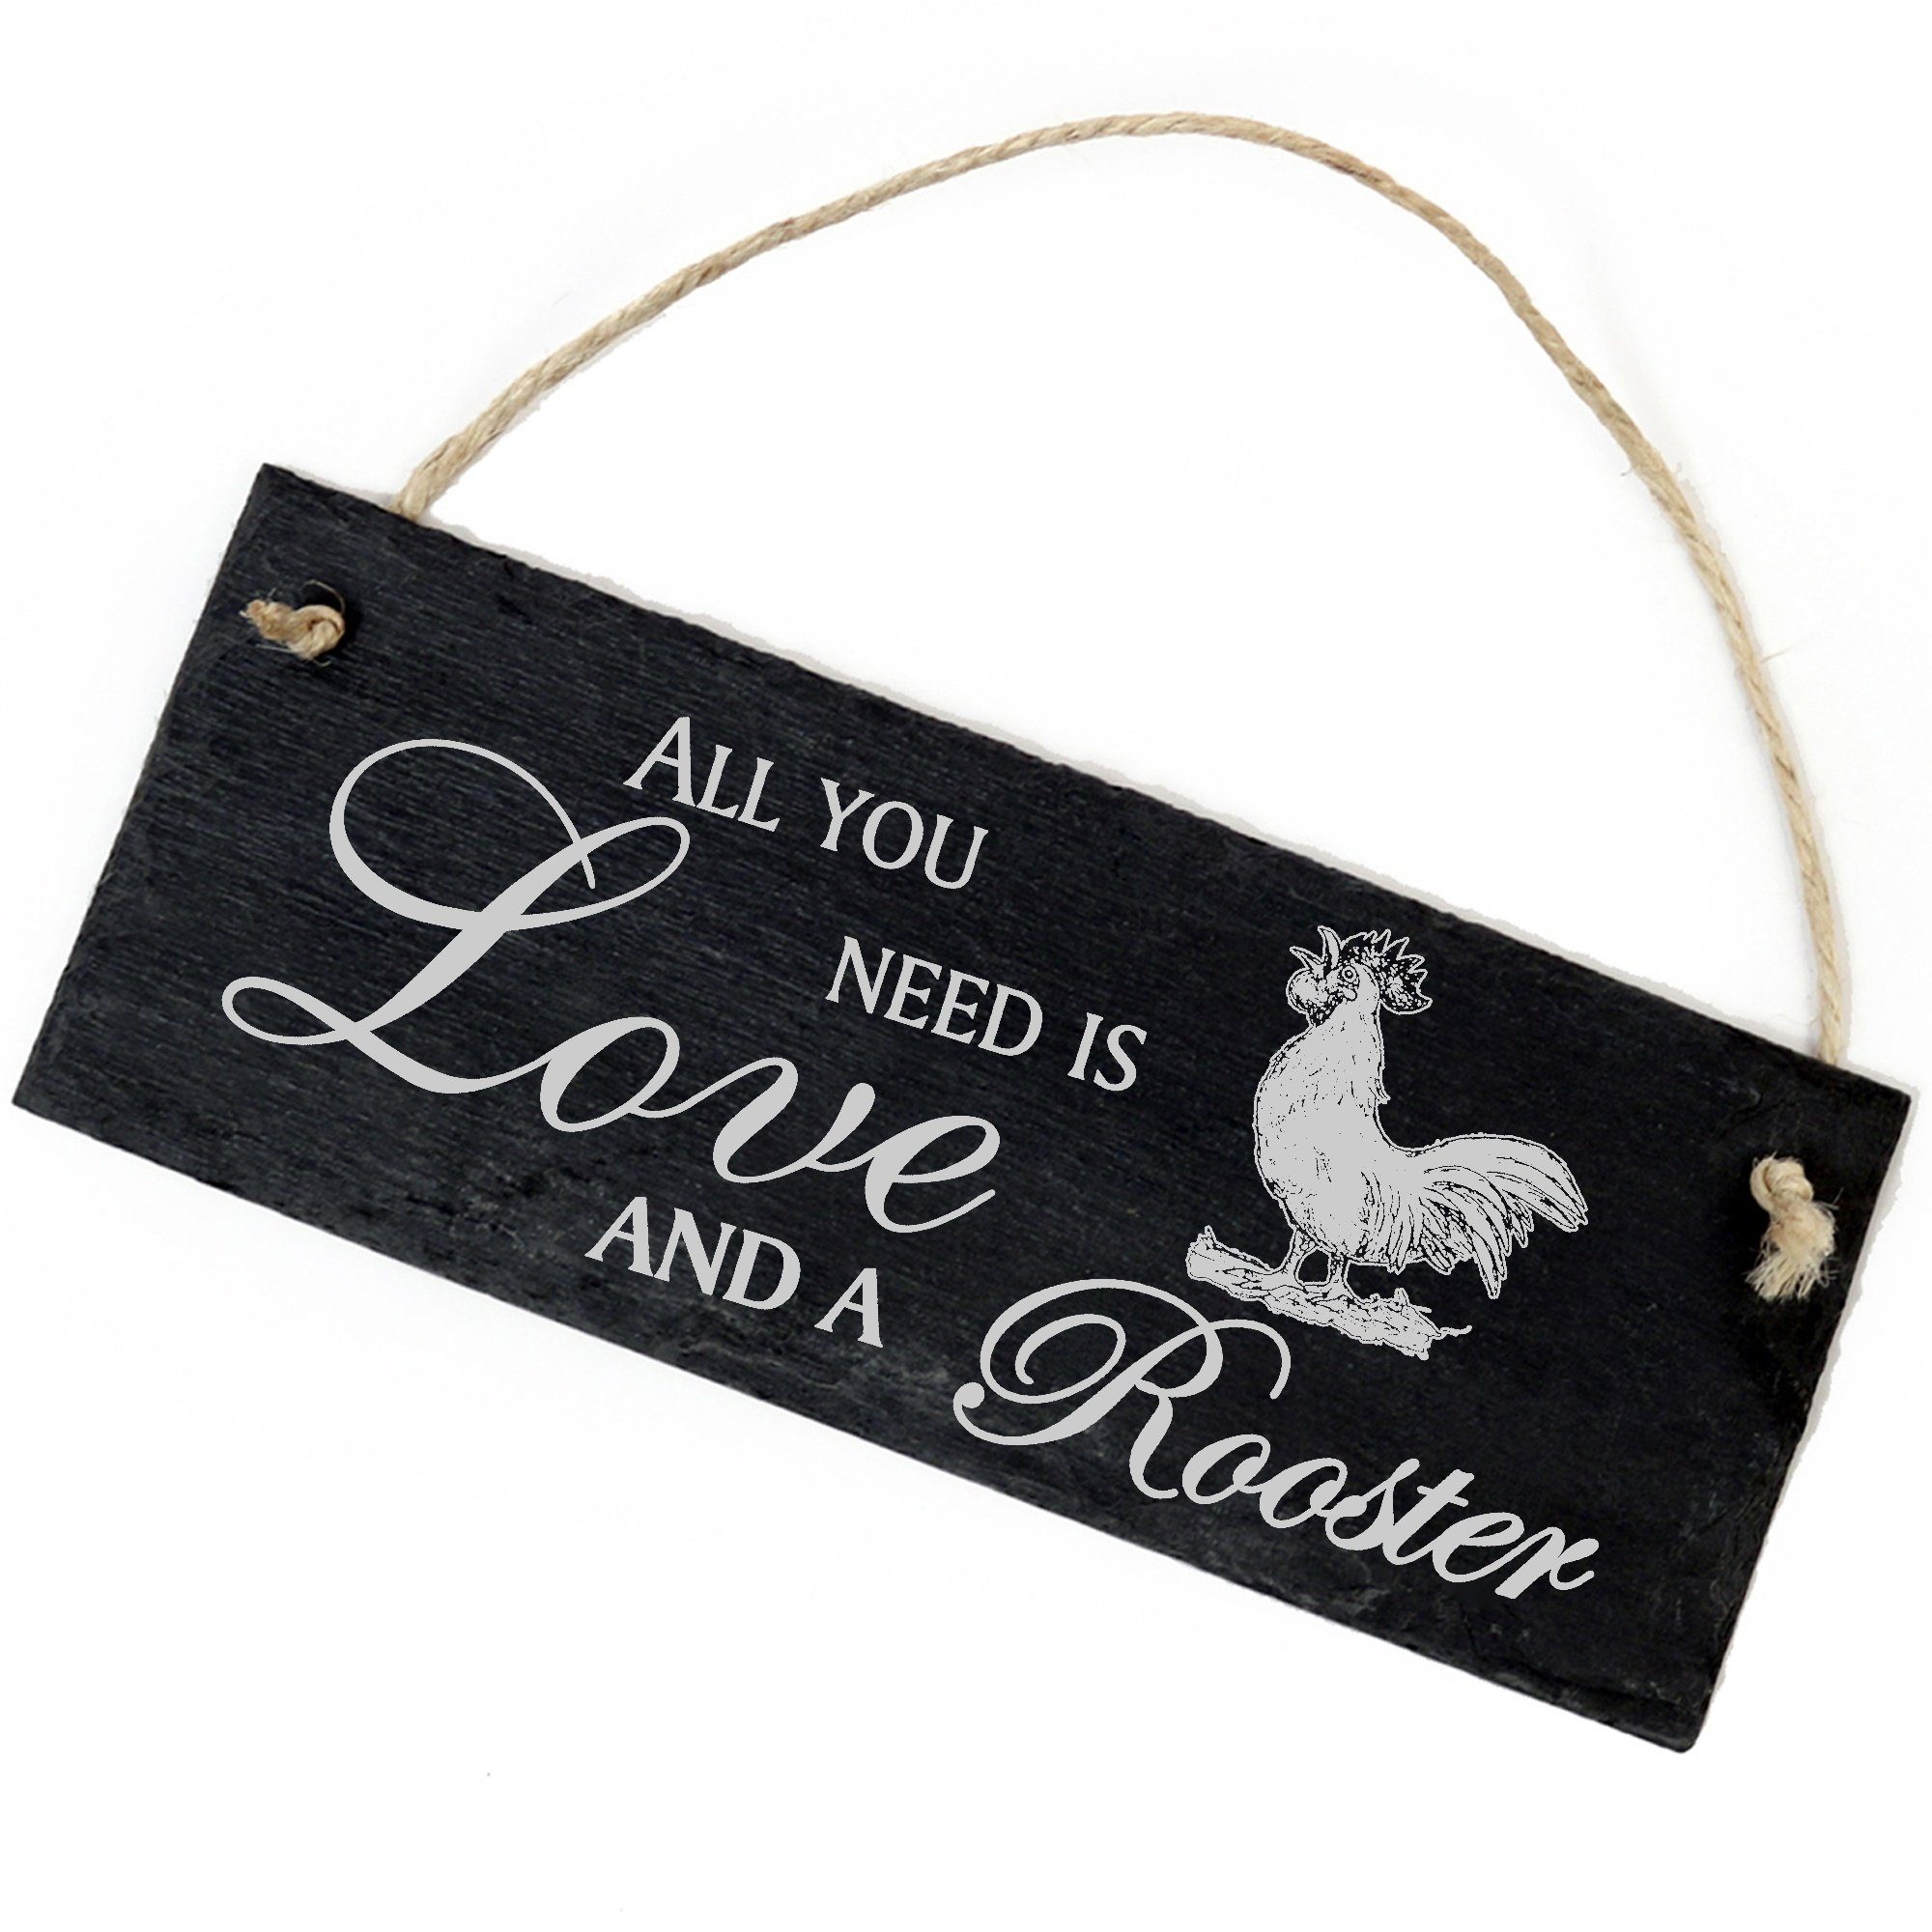 Dekolando Hängedekoration Hahn 22x8cm All you need is Love and a Rooster